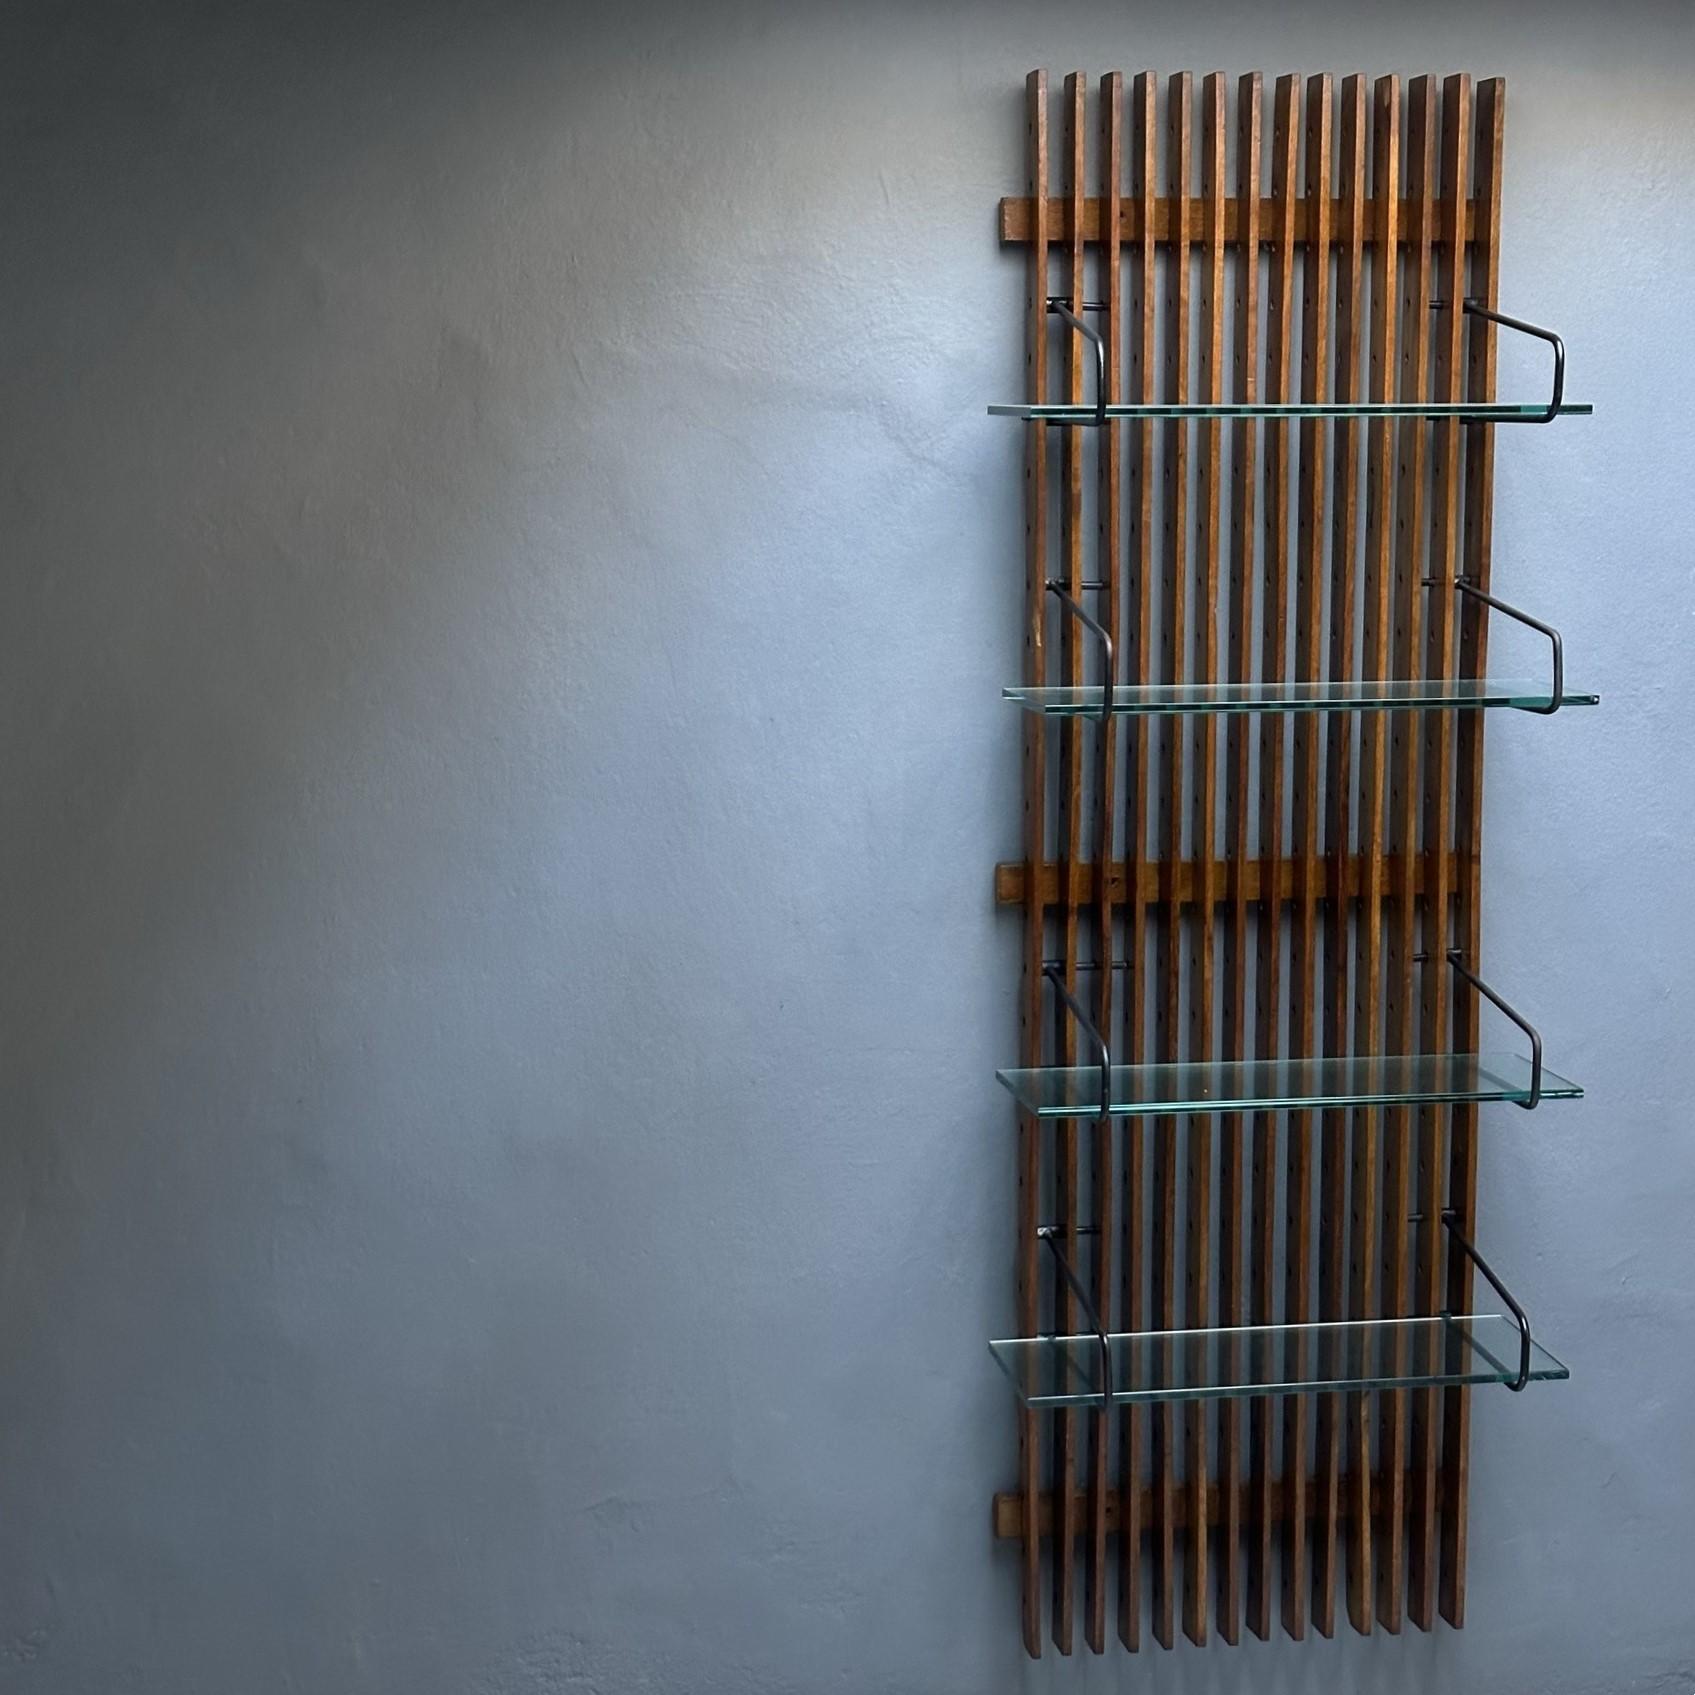 Suspended wall bookcase-étagère from the 1960s, Italian manufacture.
The bookcase has a wooden structure with four transparent glass shelves.
Shelf depth 18cm.
Good condition, however the libraryshow traces of age and use, in particular on the wood.